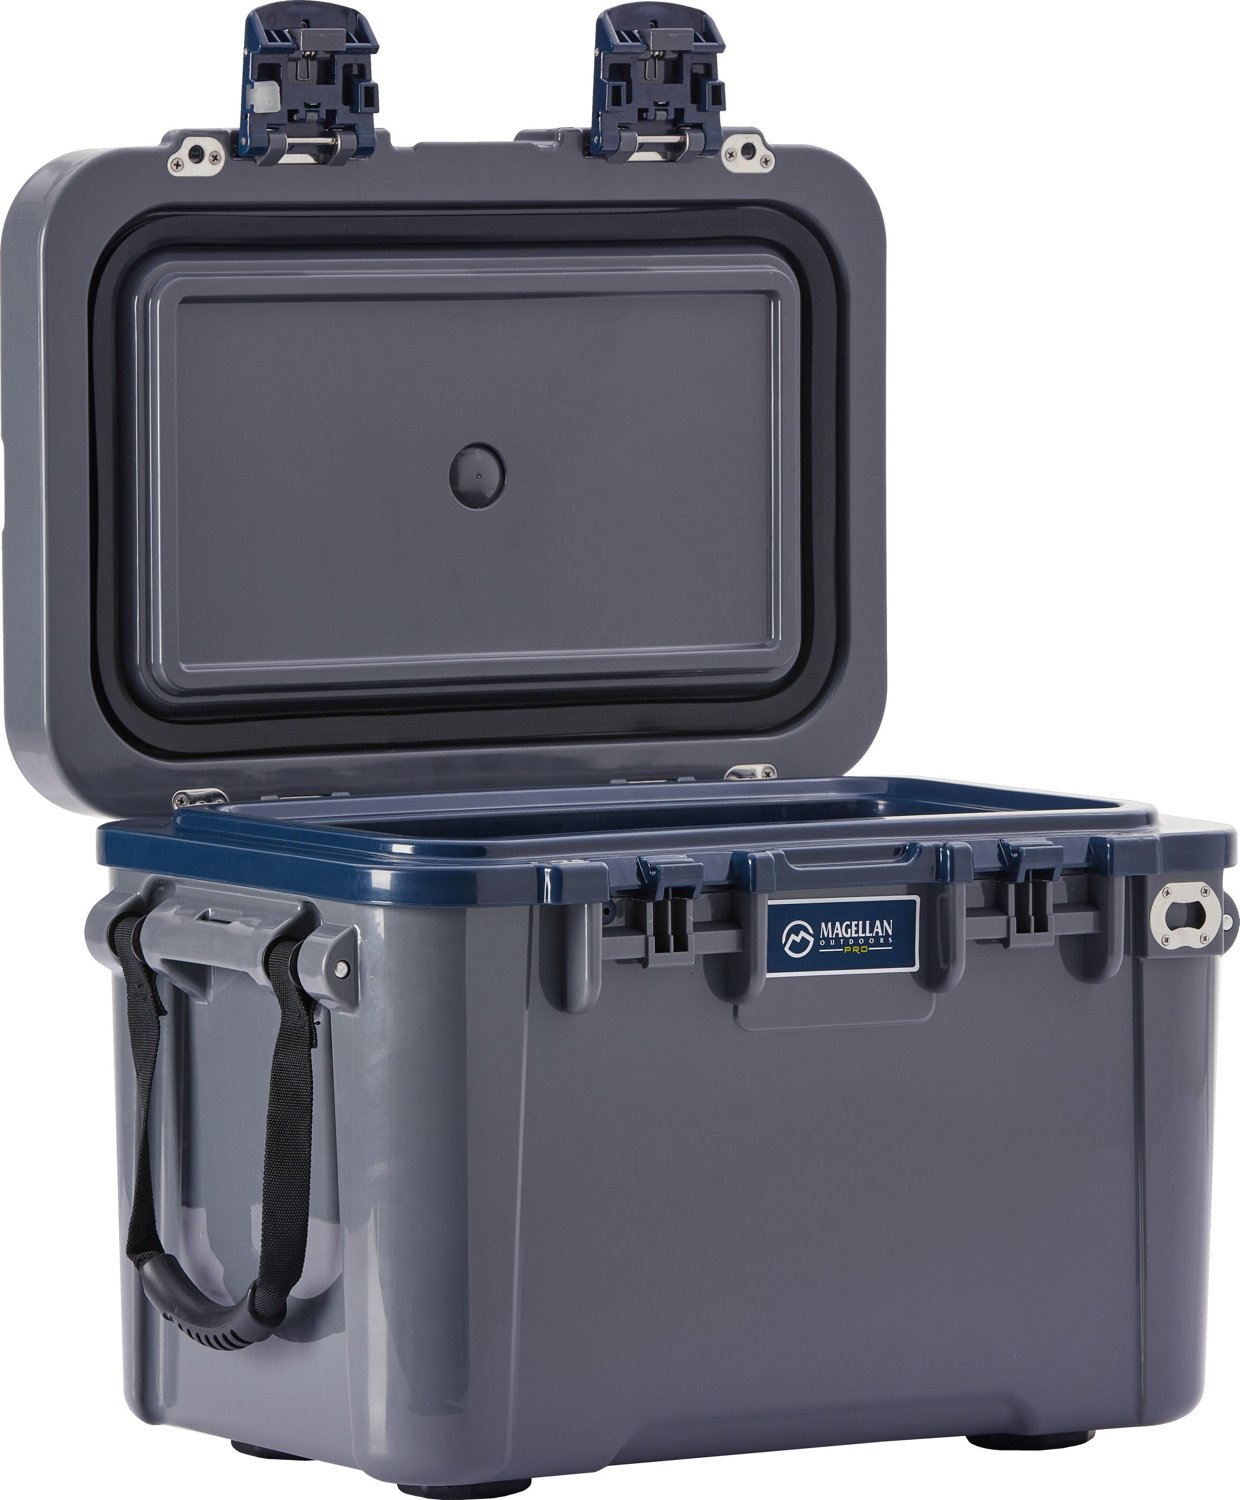 Bold North Outdoors Power2Go300 Power Box - Ice Strong Outdoors